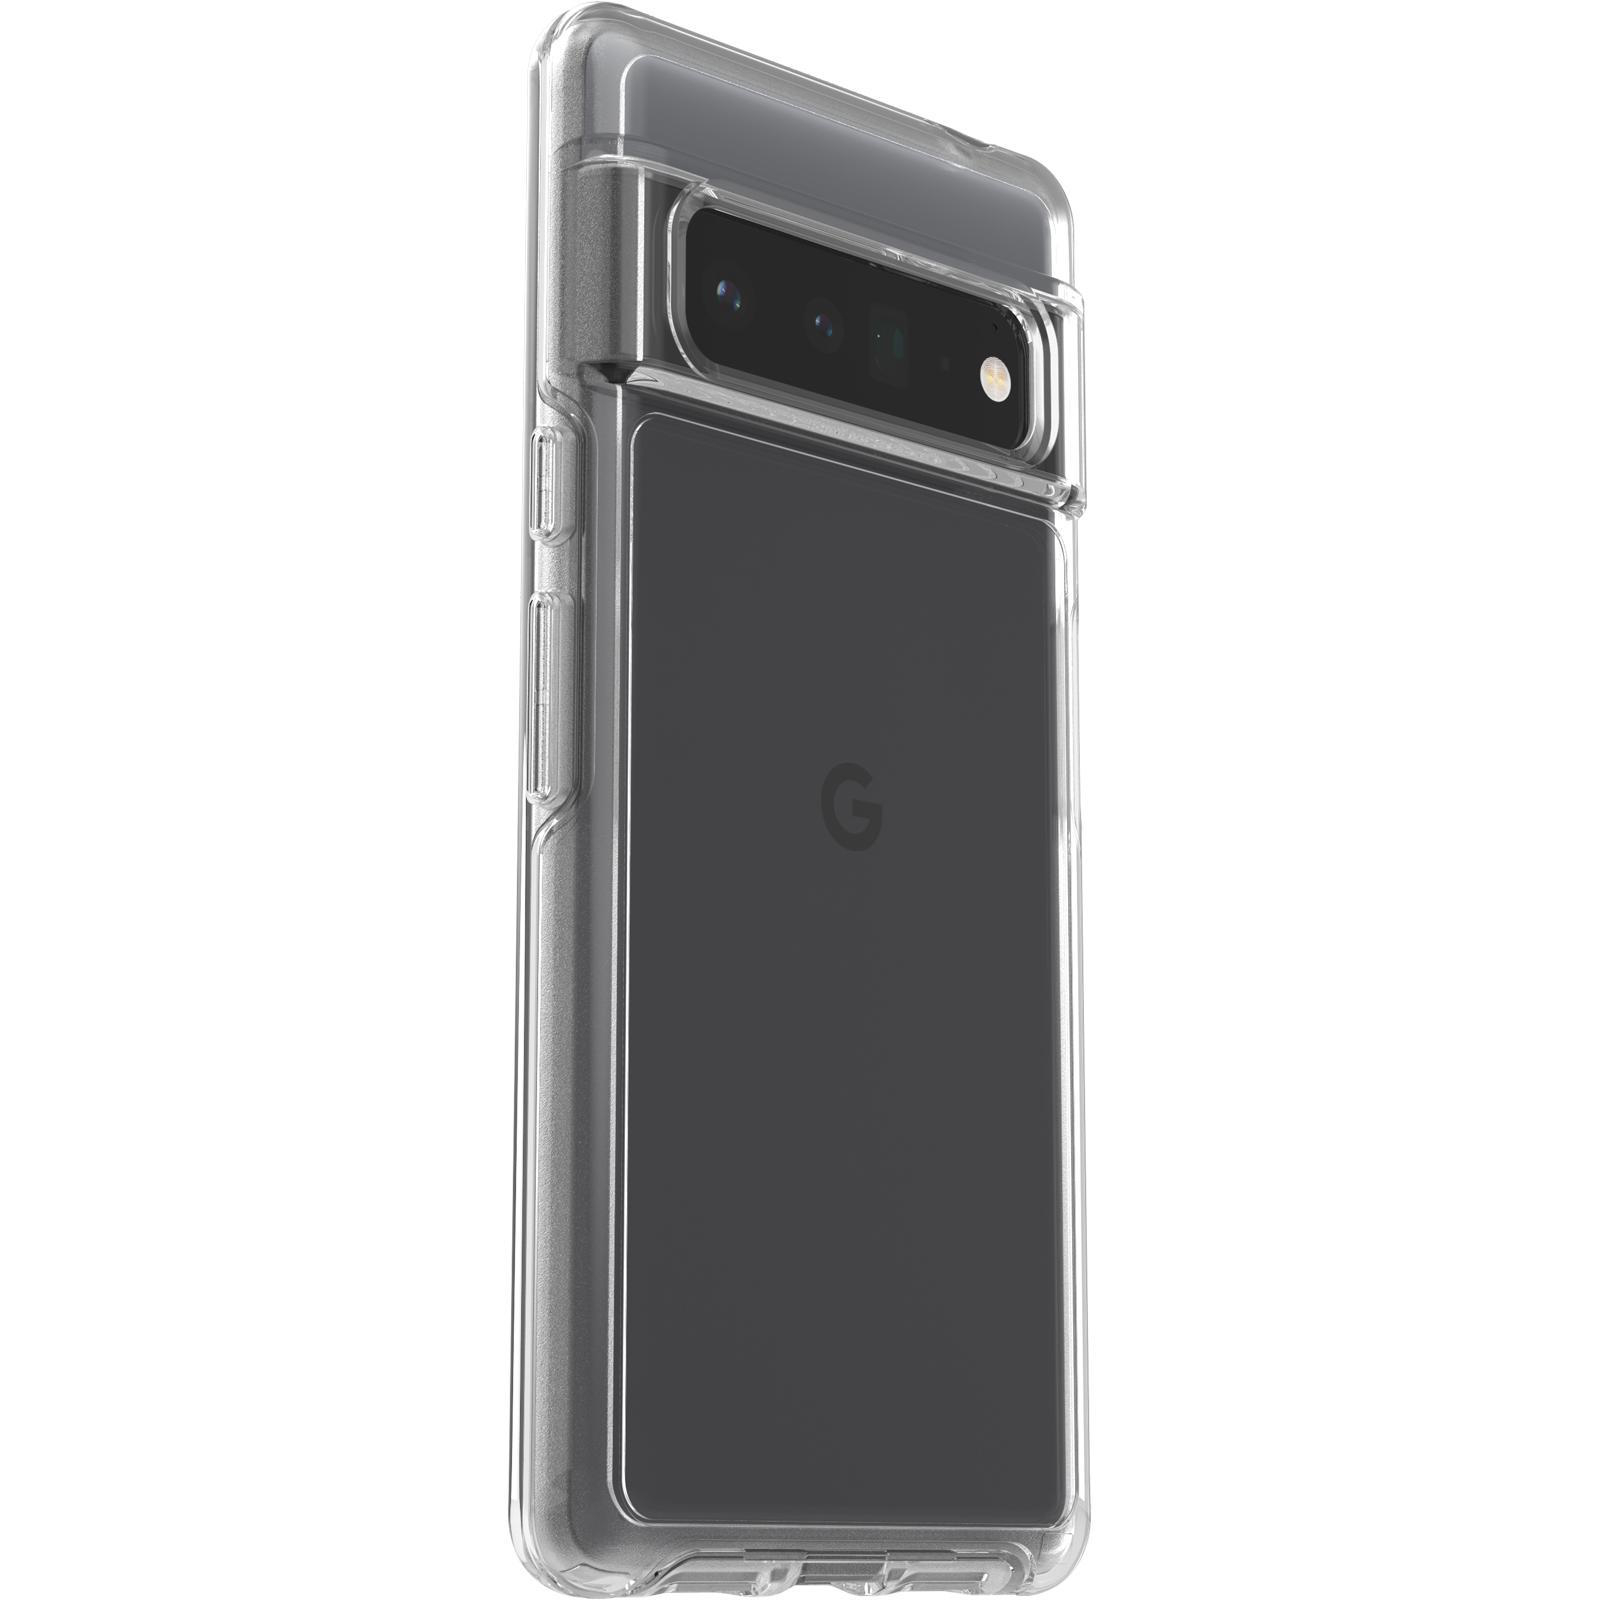 Symmetry Backcover, Pixel 6 Pro, Google, Series, Clear OTTERBOX